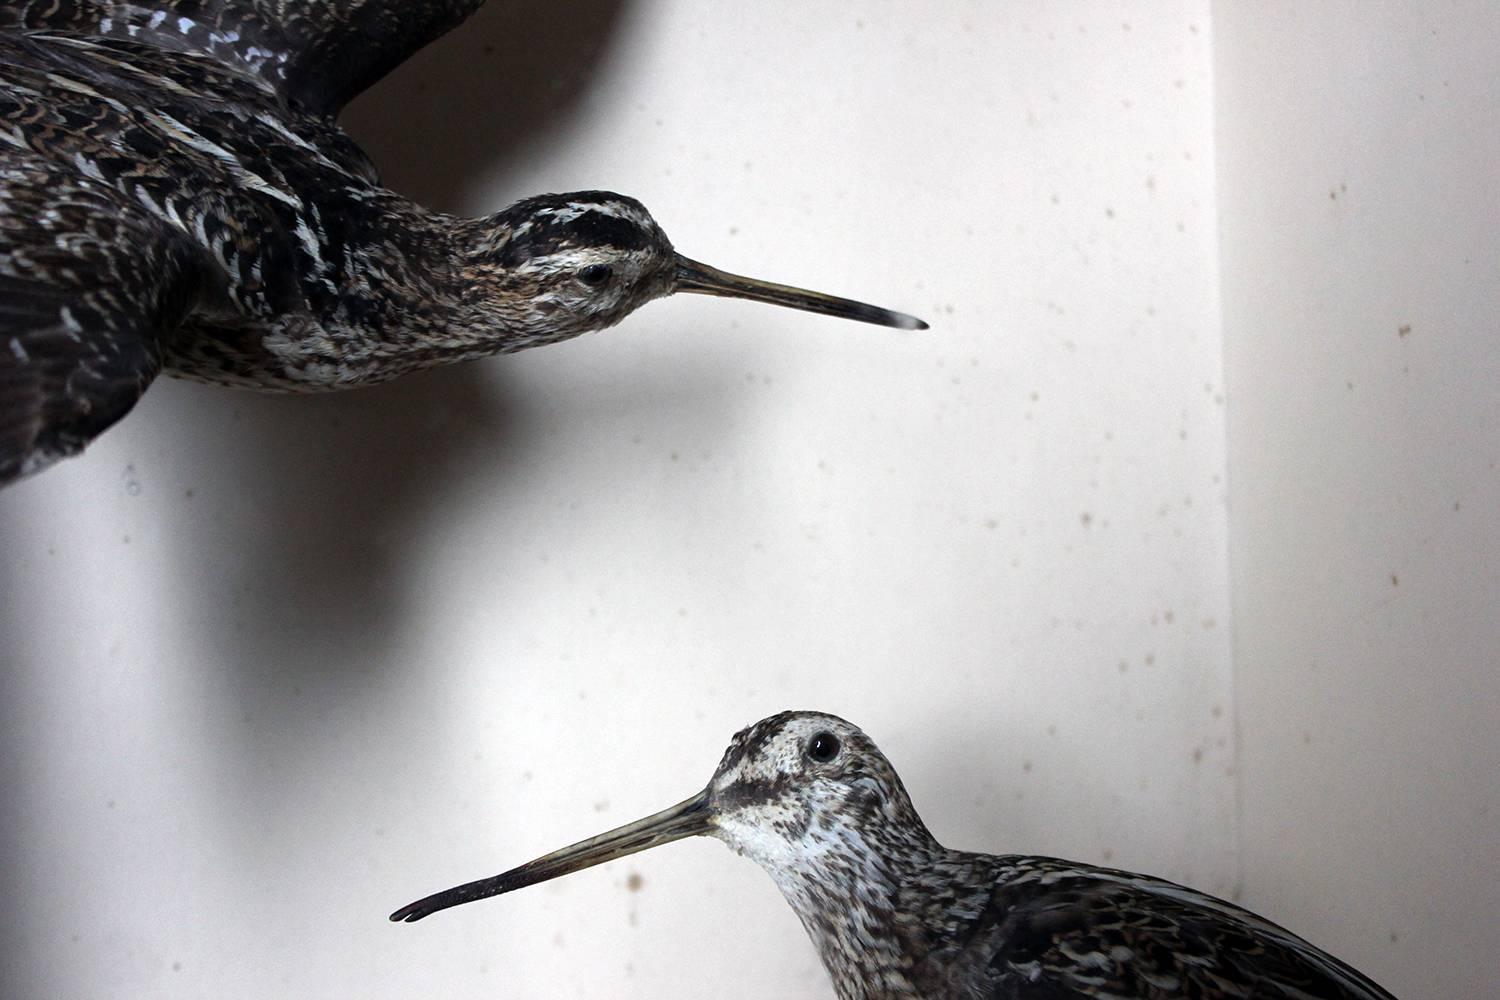 The beautifully preserved male and female common European snipes (Gallinago gallinago) poised in opposing positions, the female stood, with the male rendered in flight, housed within a typical Cullingford glazed museum case being square and faux oak